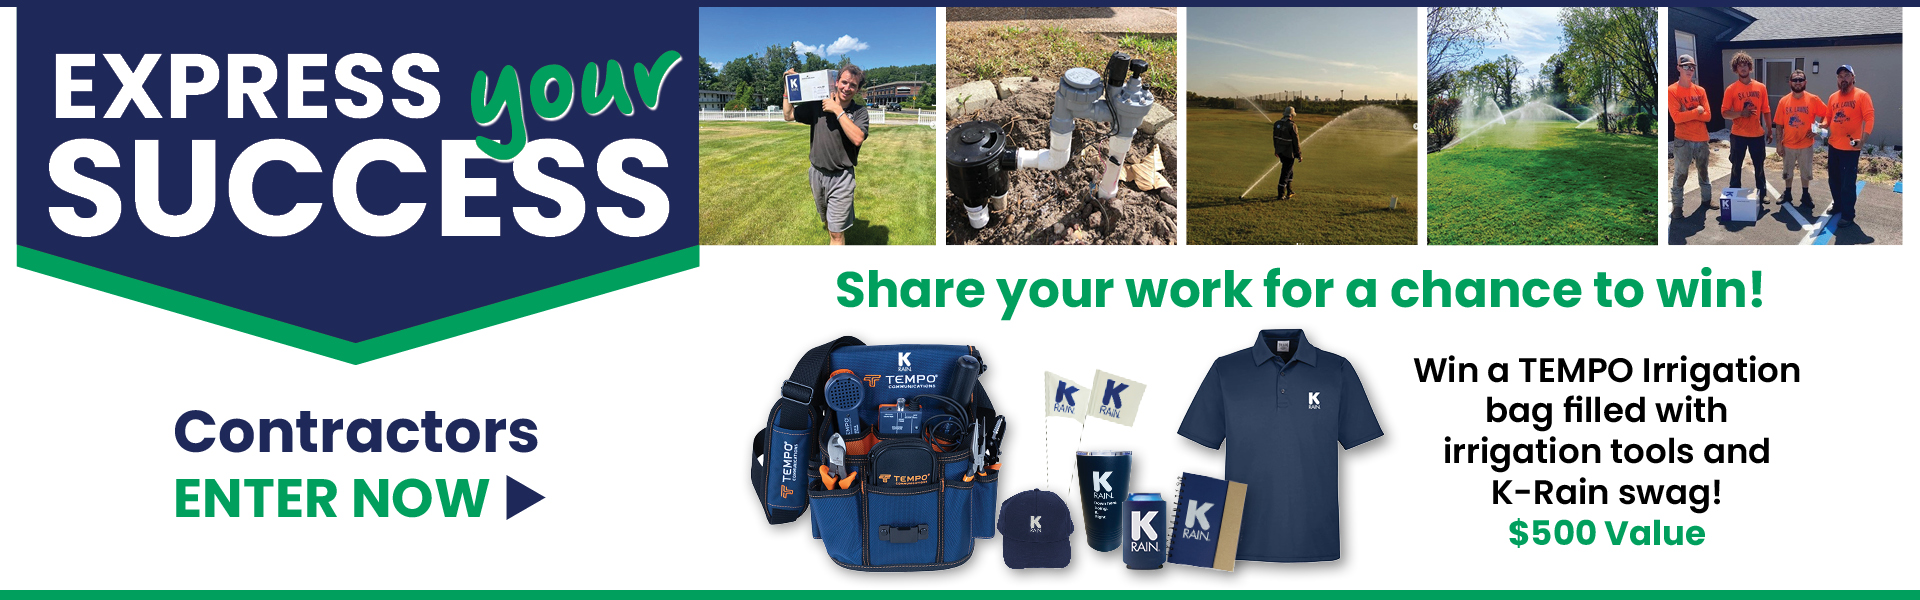 Submit a job site with K-Rain installed and enter to win a irrigation tool bag.